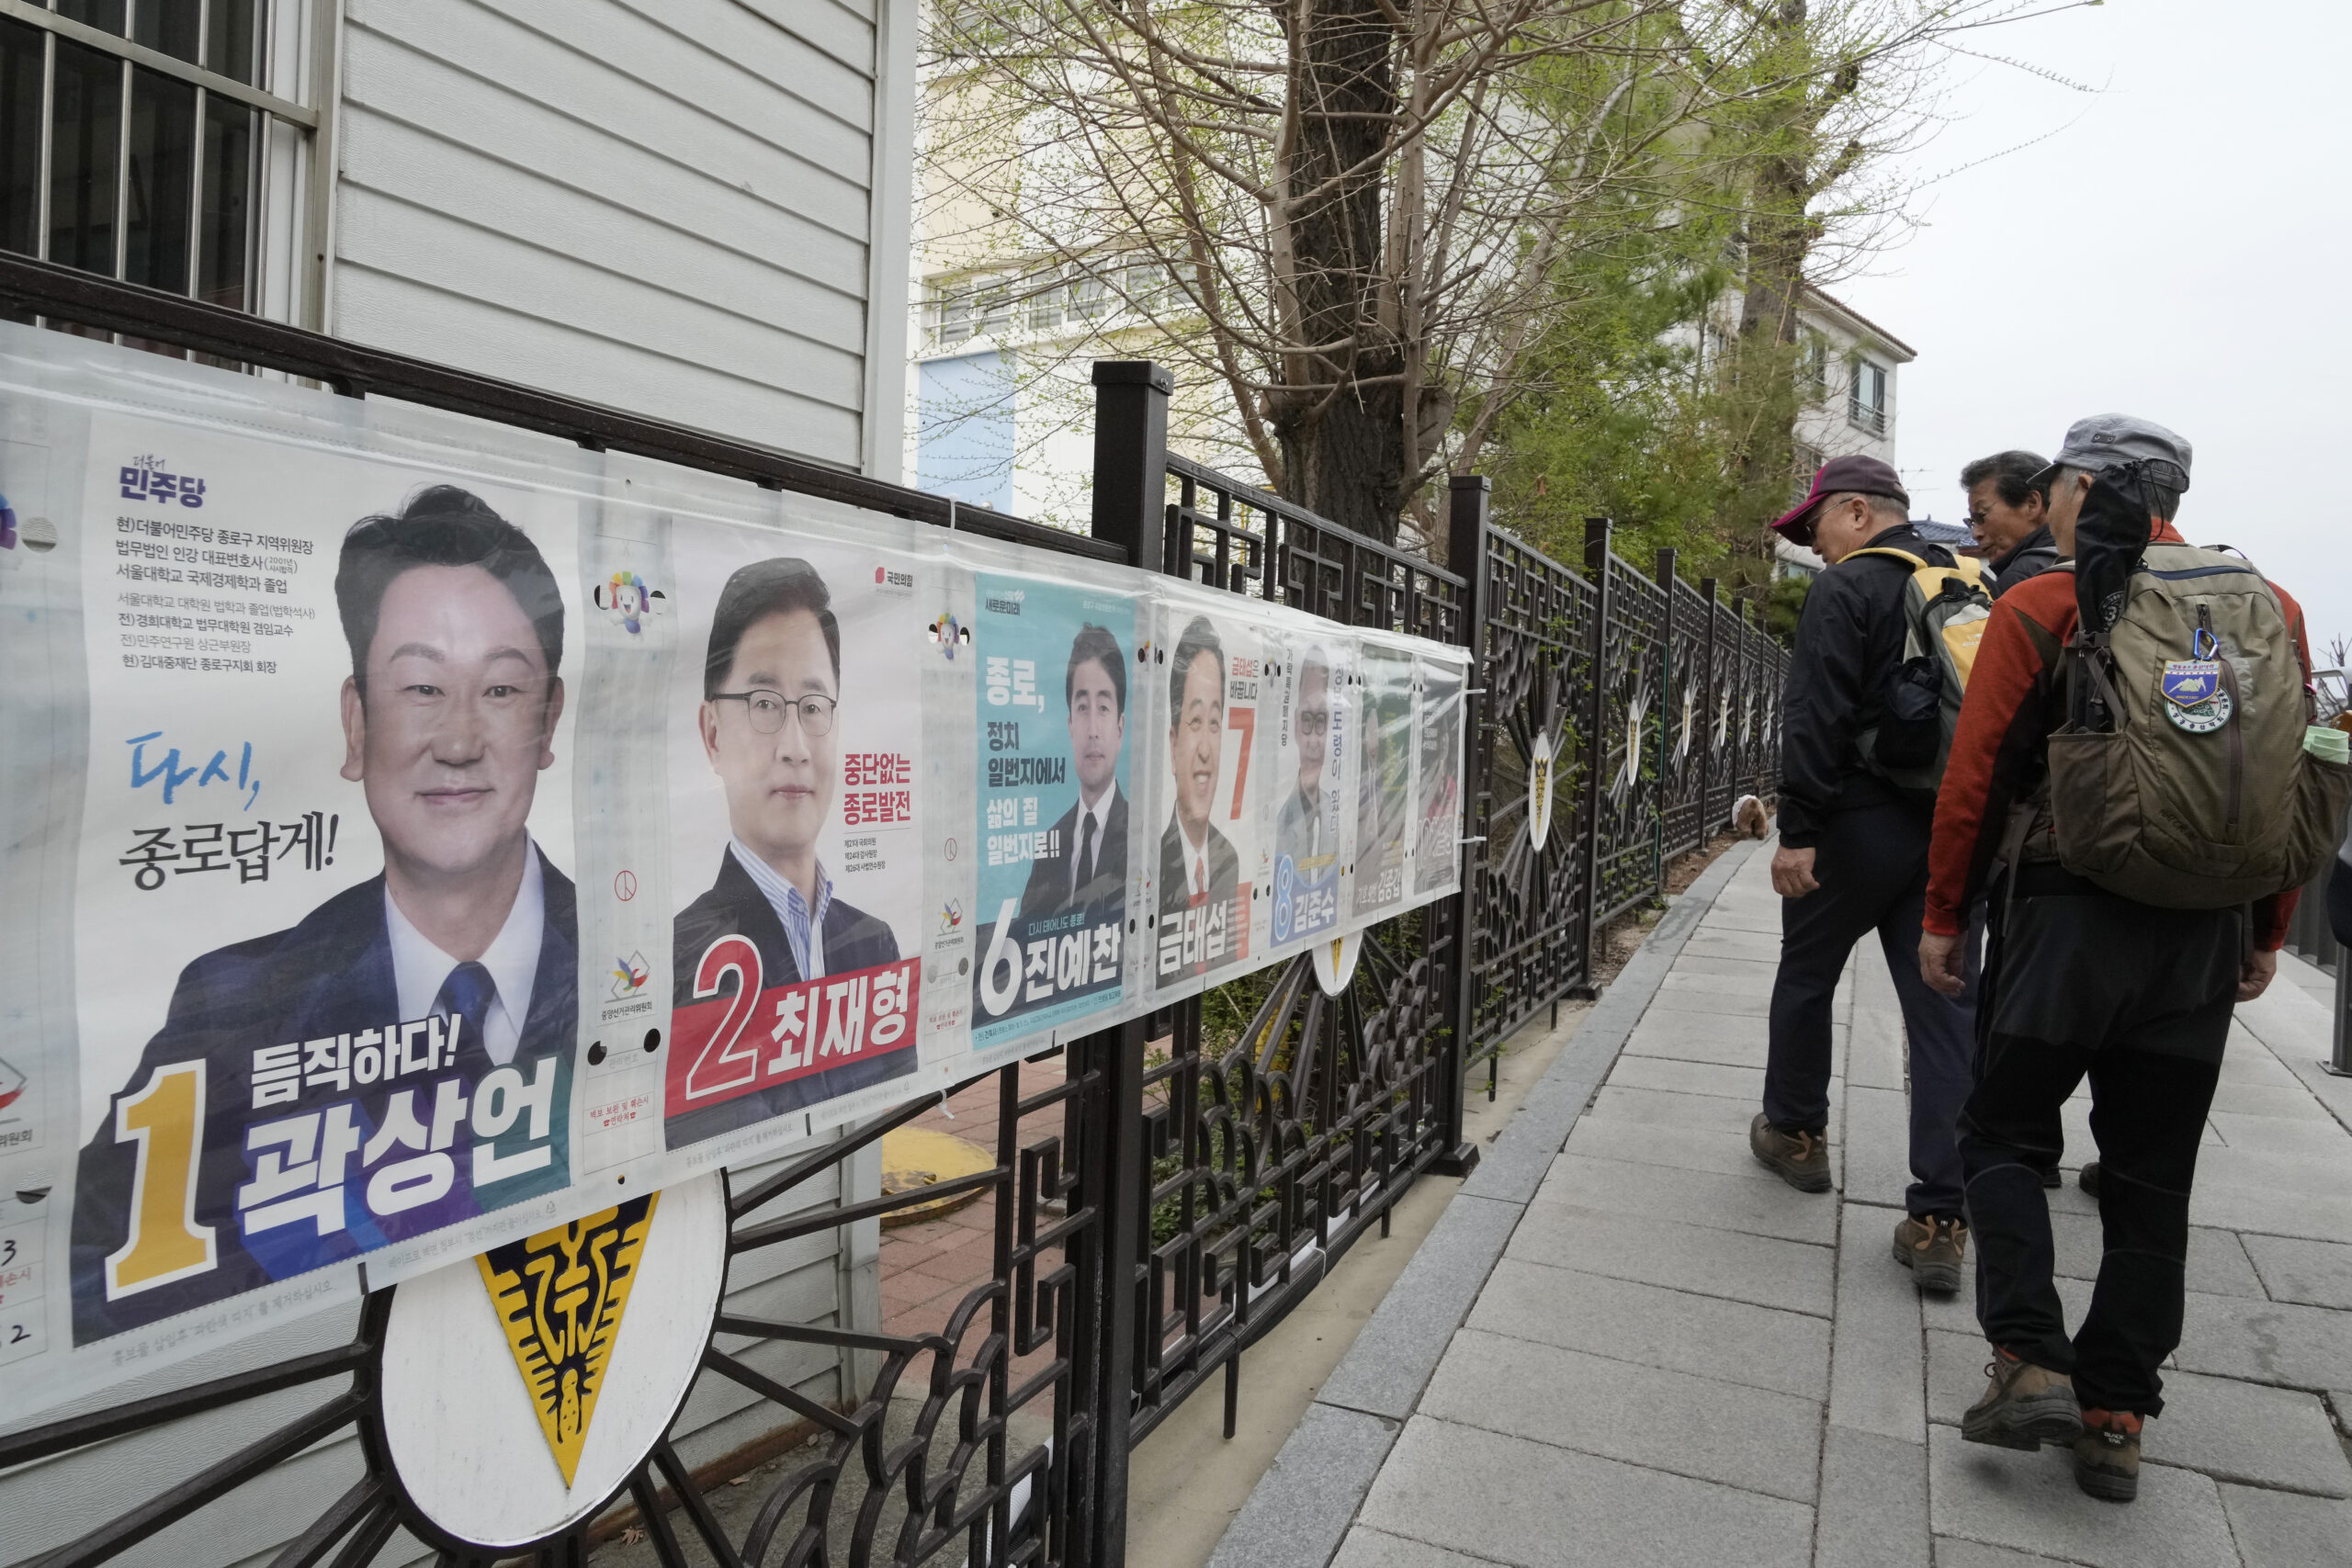 South Korea polls issues: Green onions, apples, striking doctors